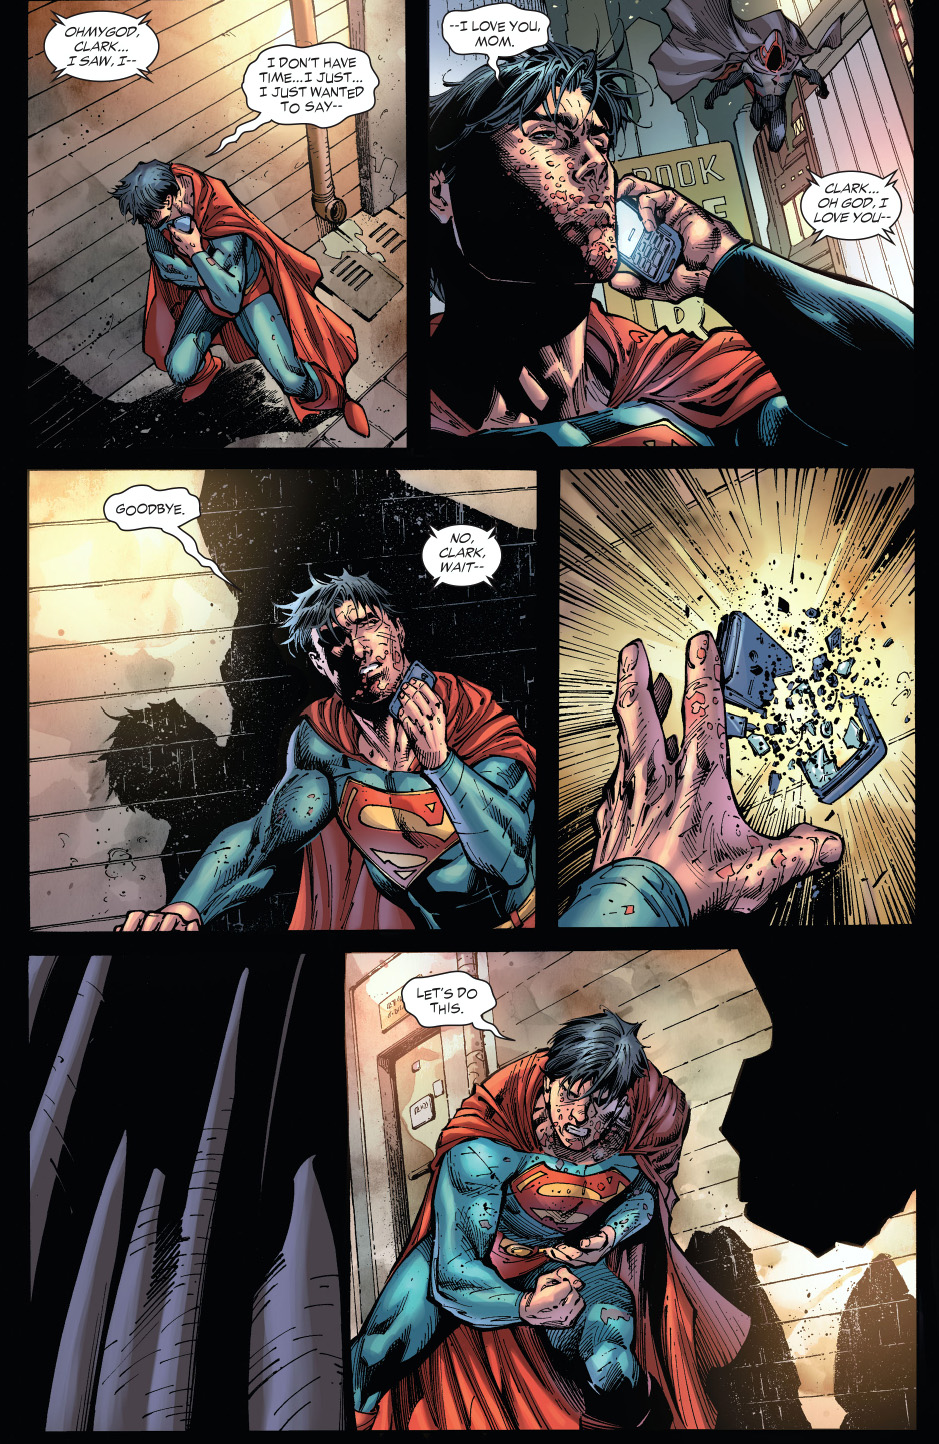 zod tortures superman (earth 1)